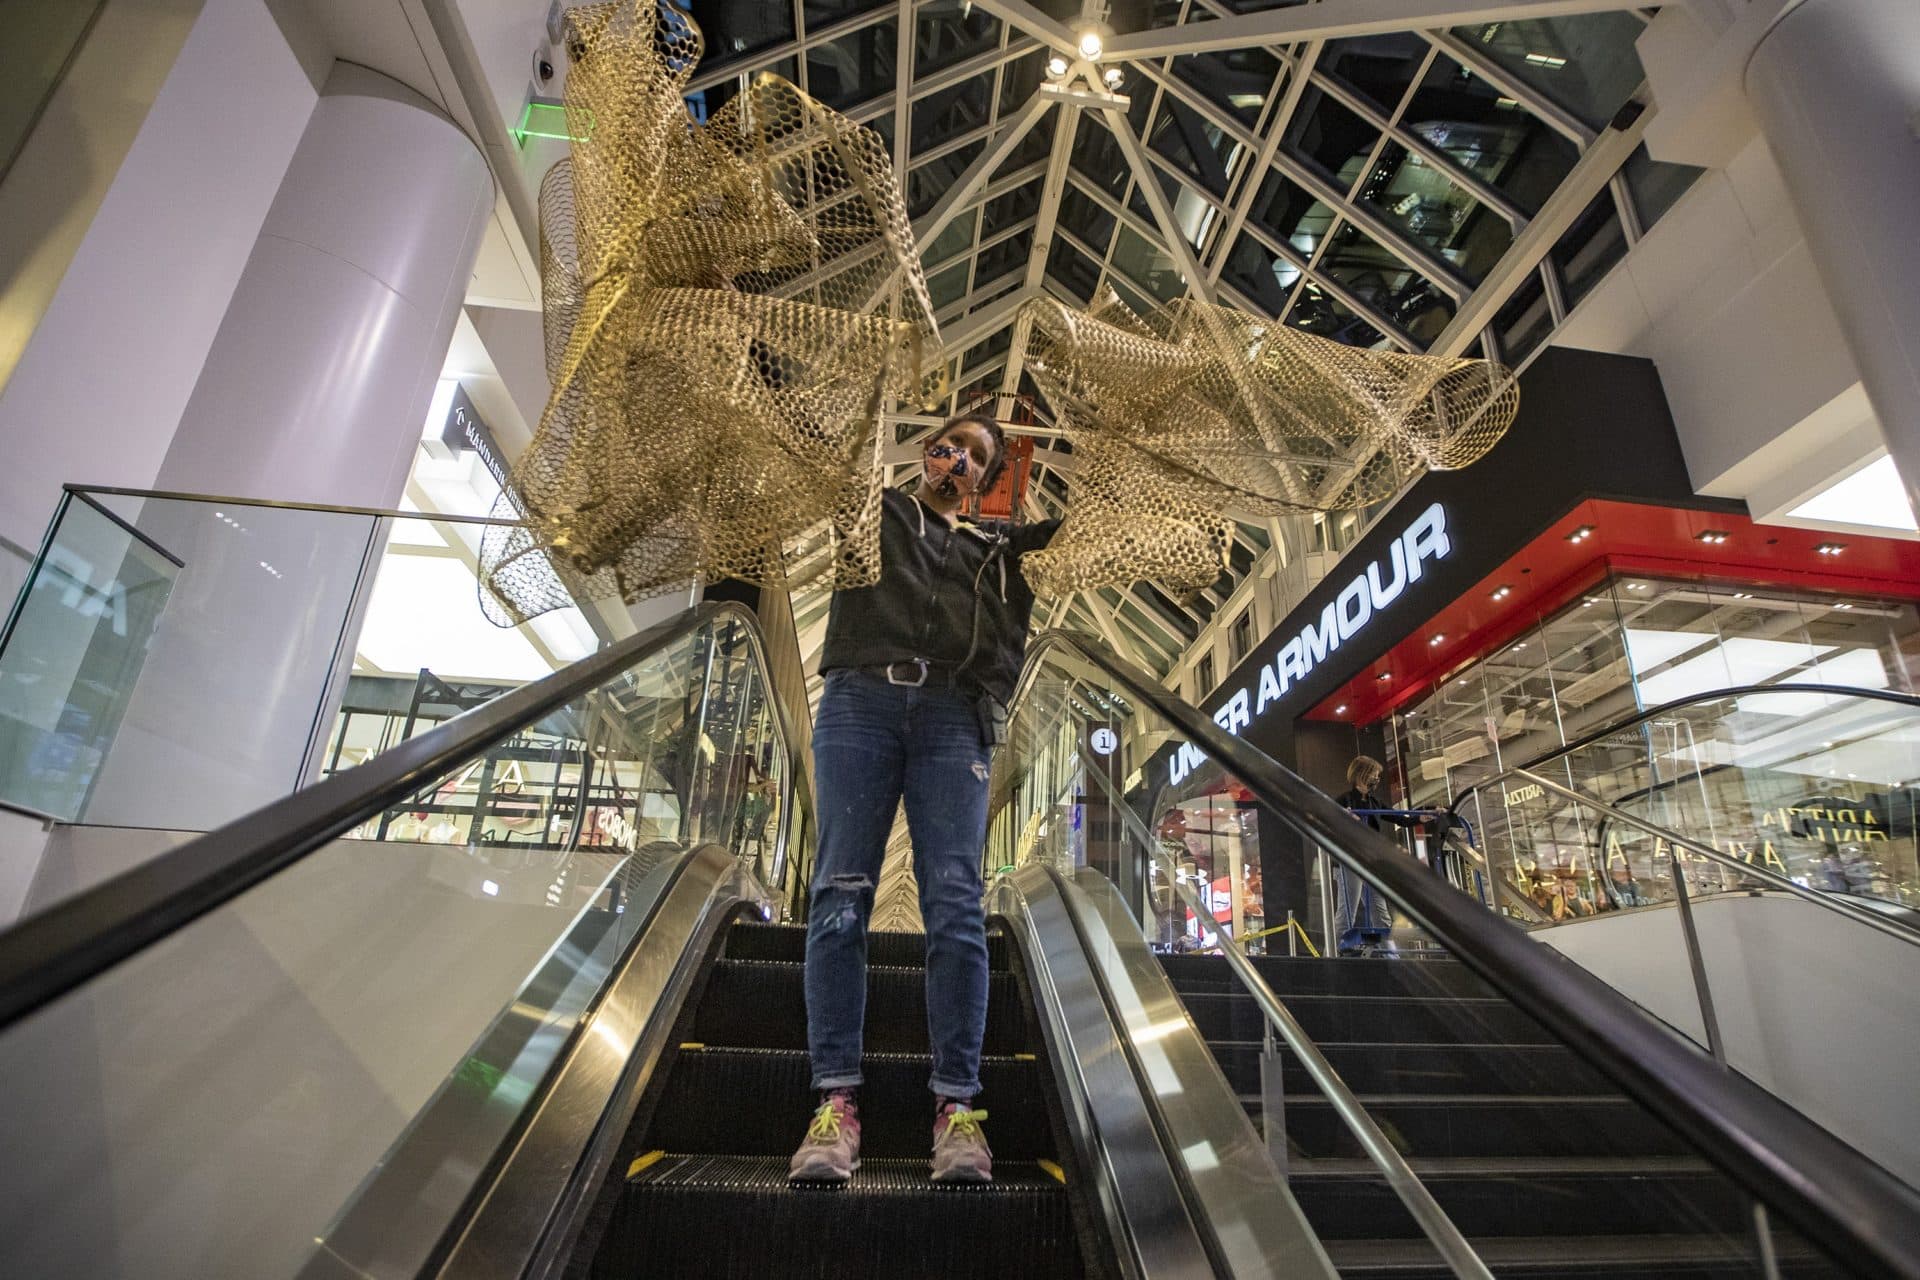 Cicely Carew rides down the escalator with two pieces of material for her “Alta Major” piece to be installed in the front entrance of the Prudential Center. (Jesse Costa/WBUR)